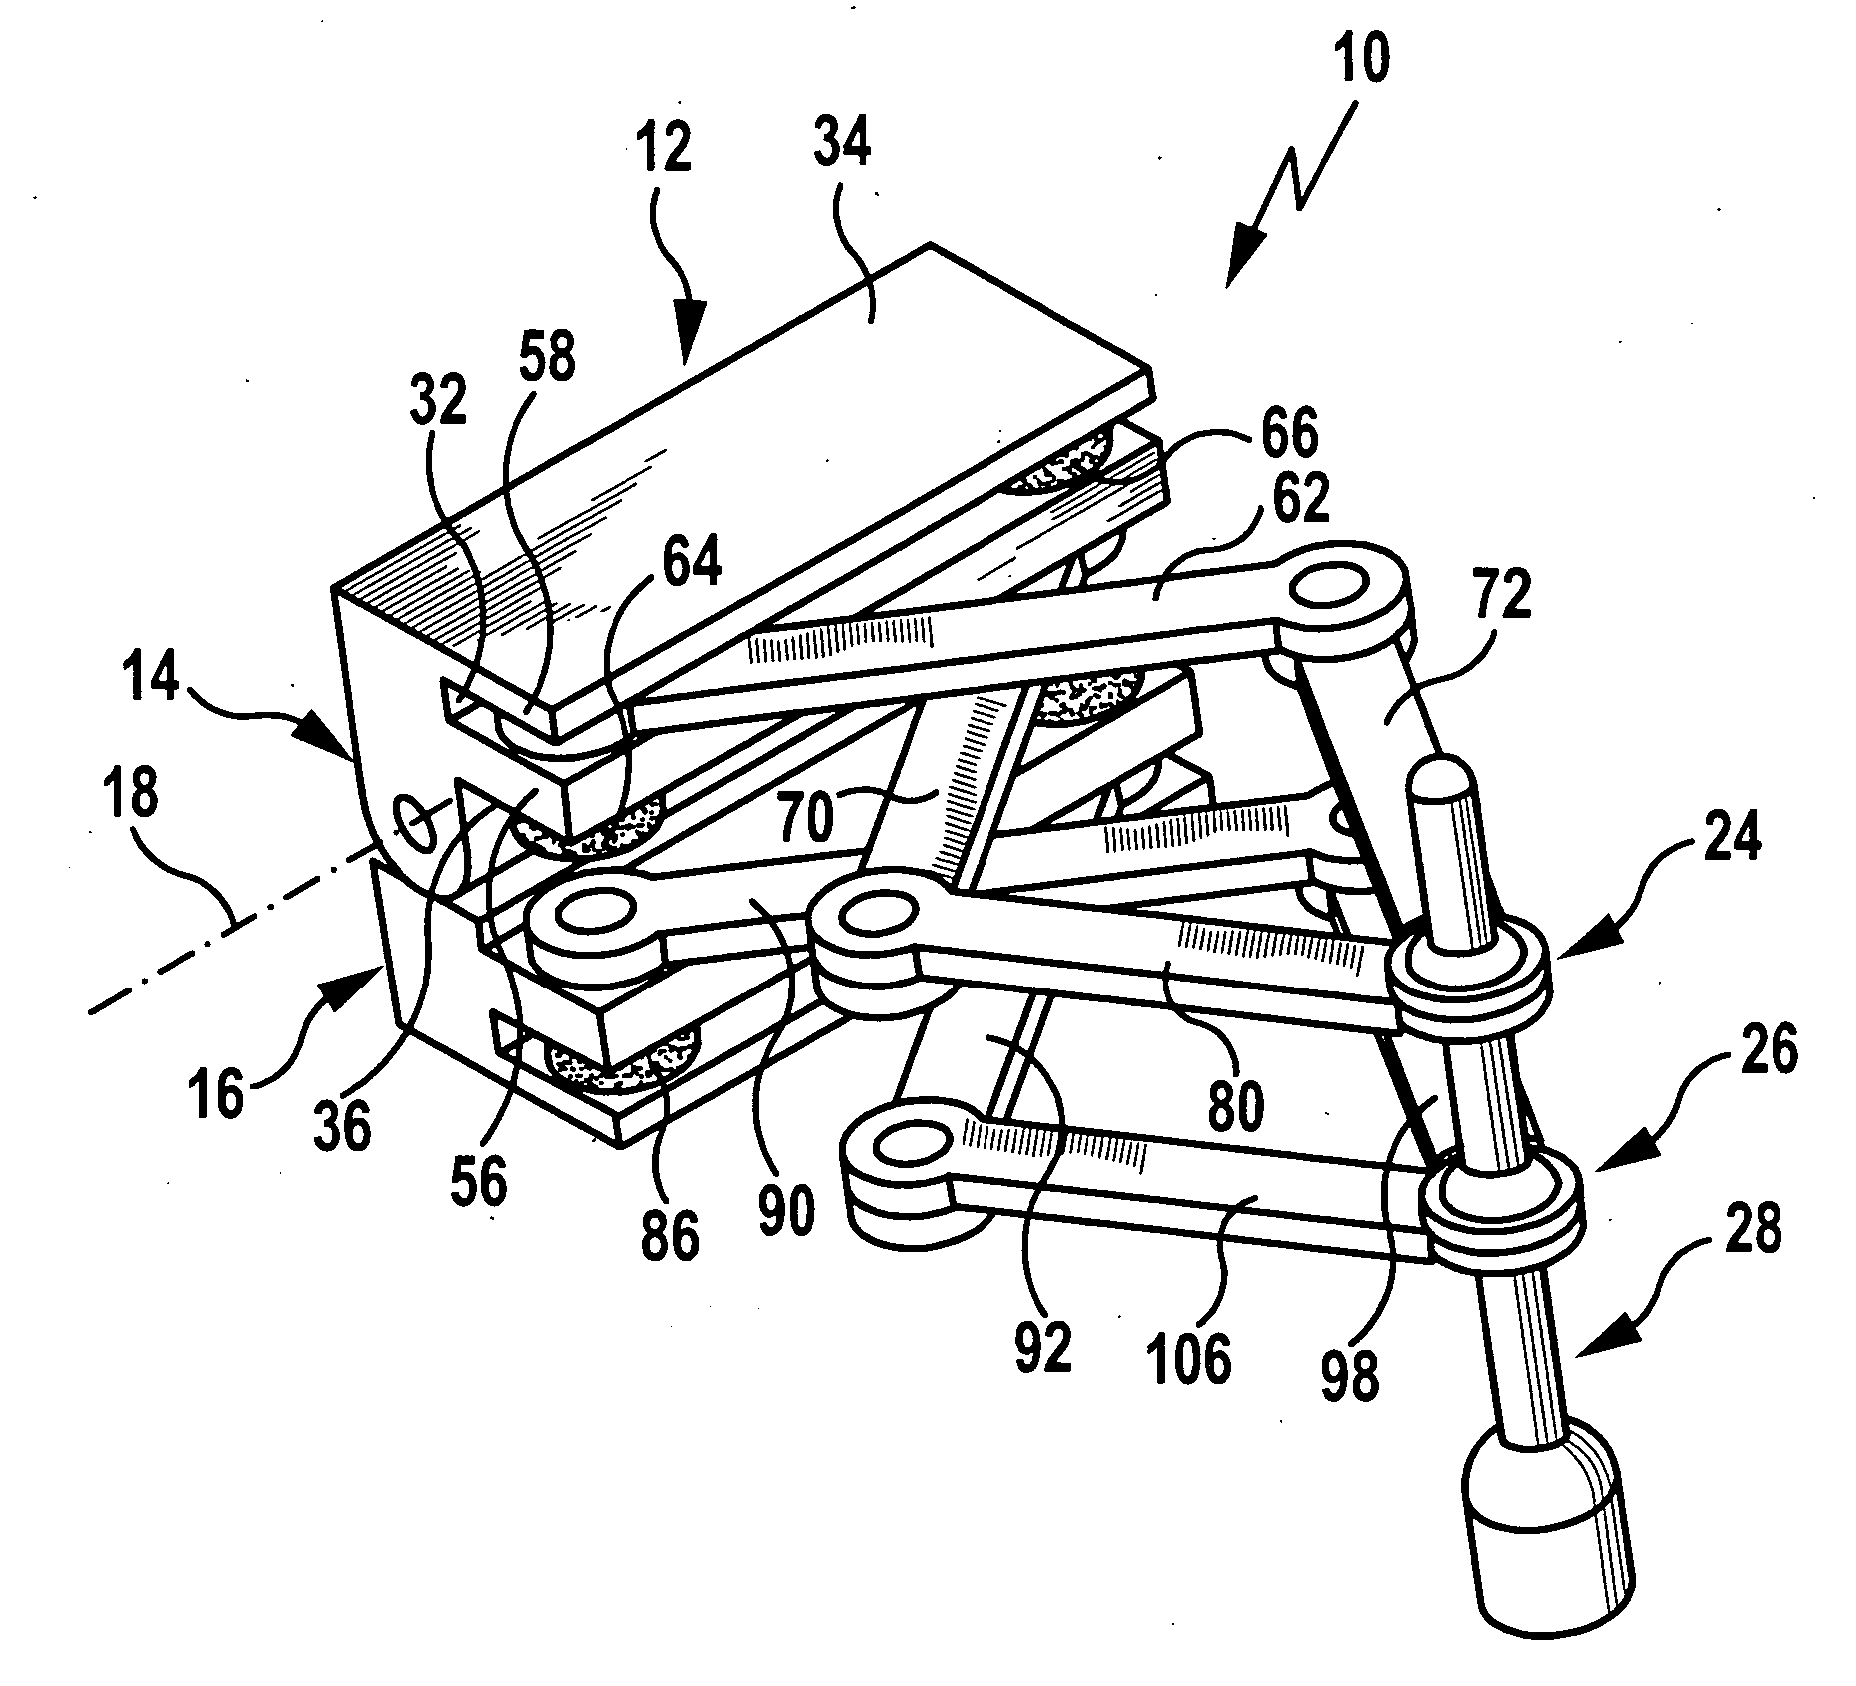 Surgical holding device